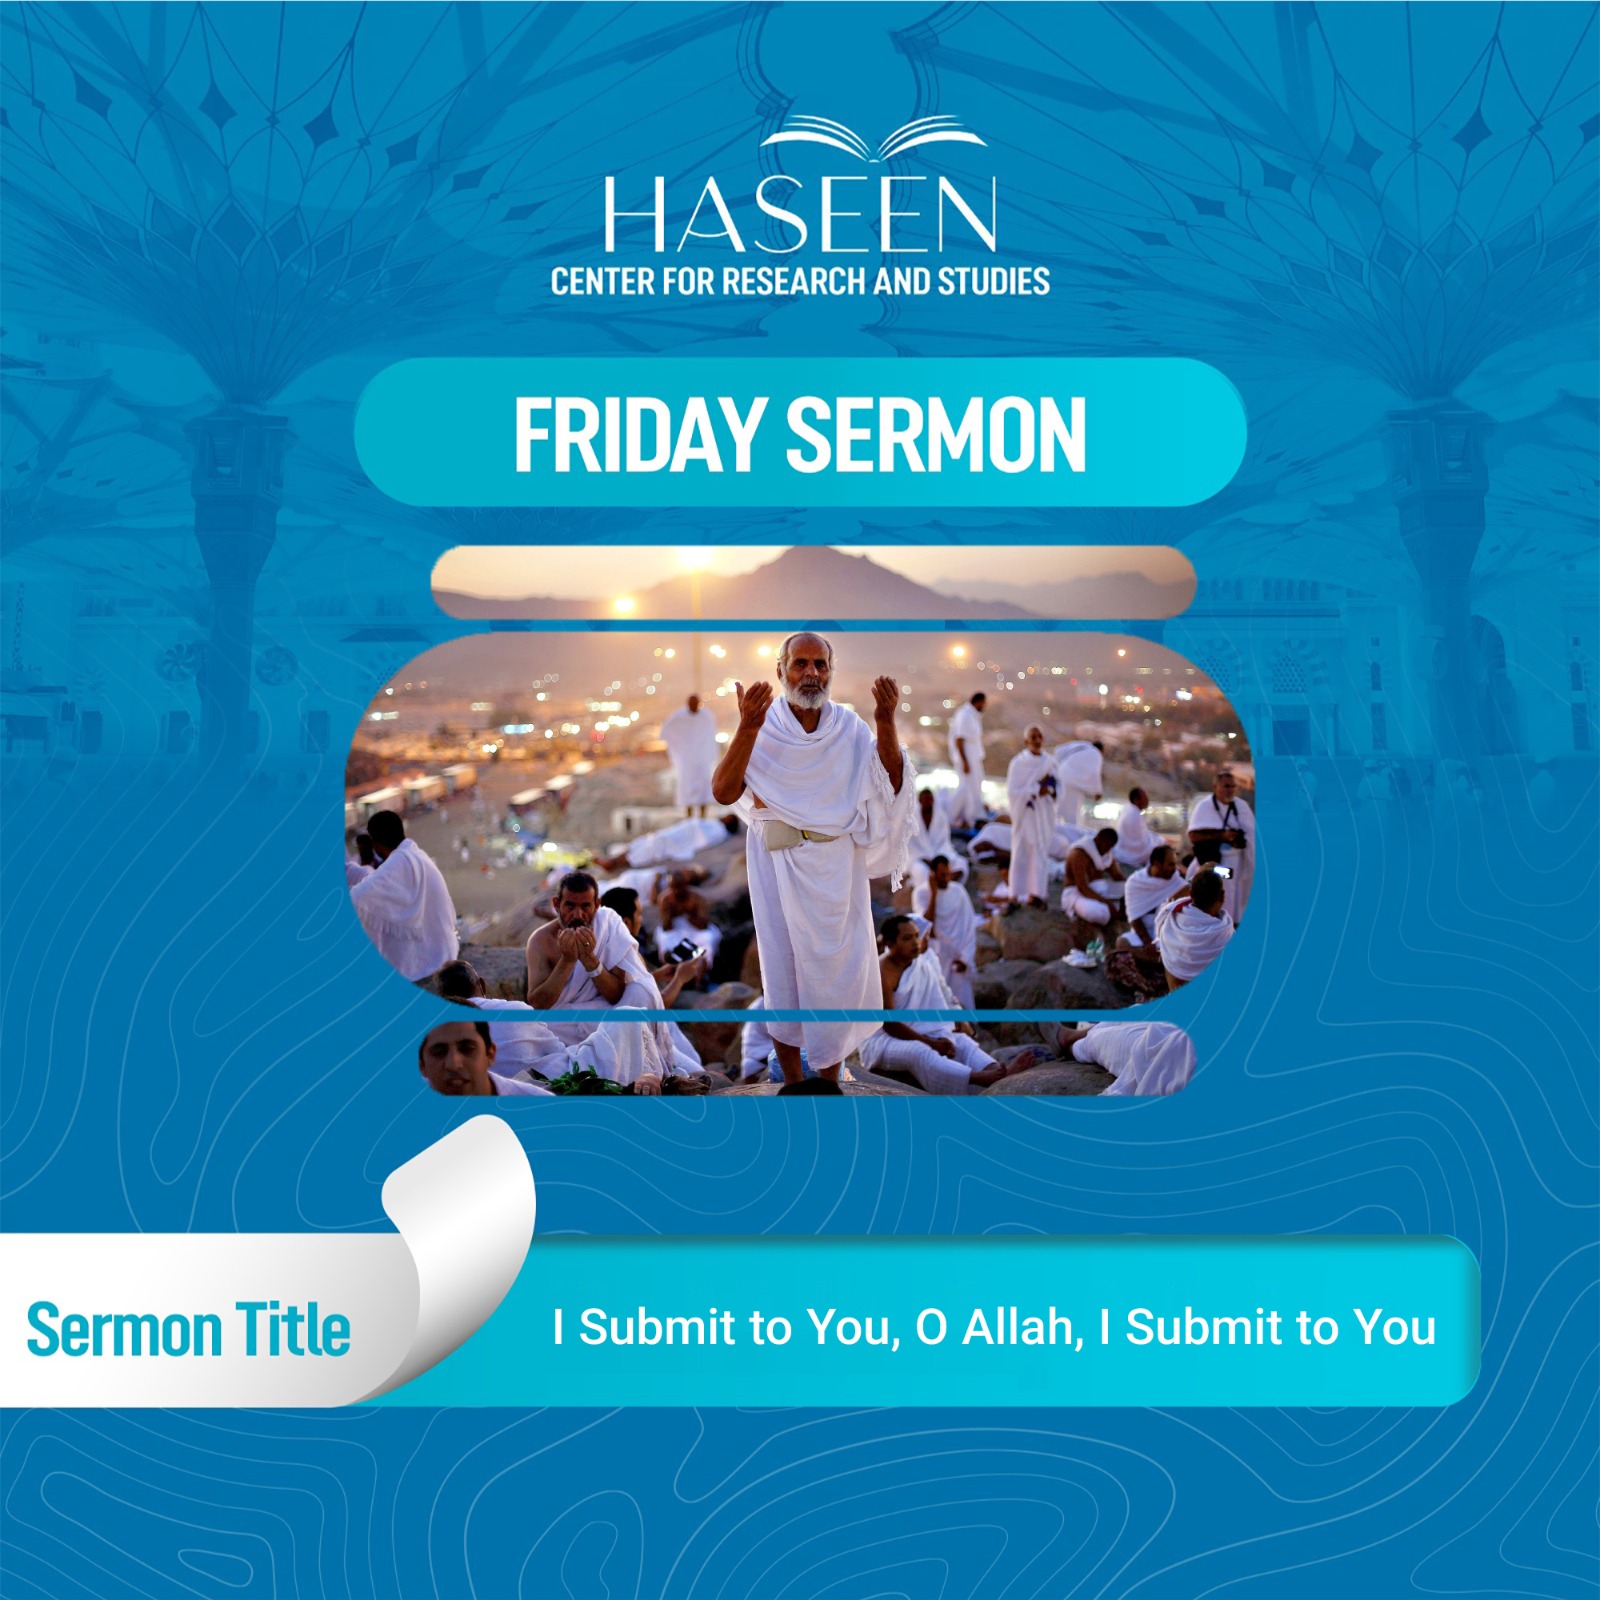 Title of the Sermon: I Submit to You, O Allah, I Submit to You